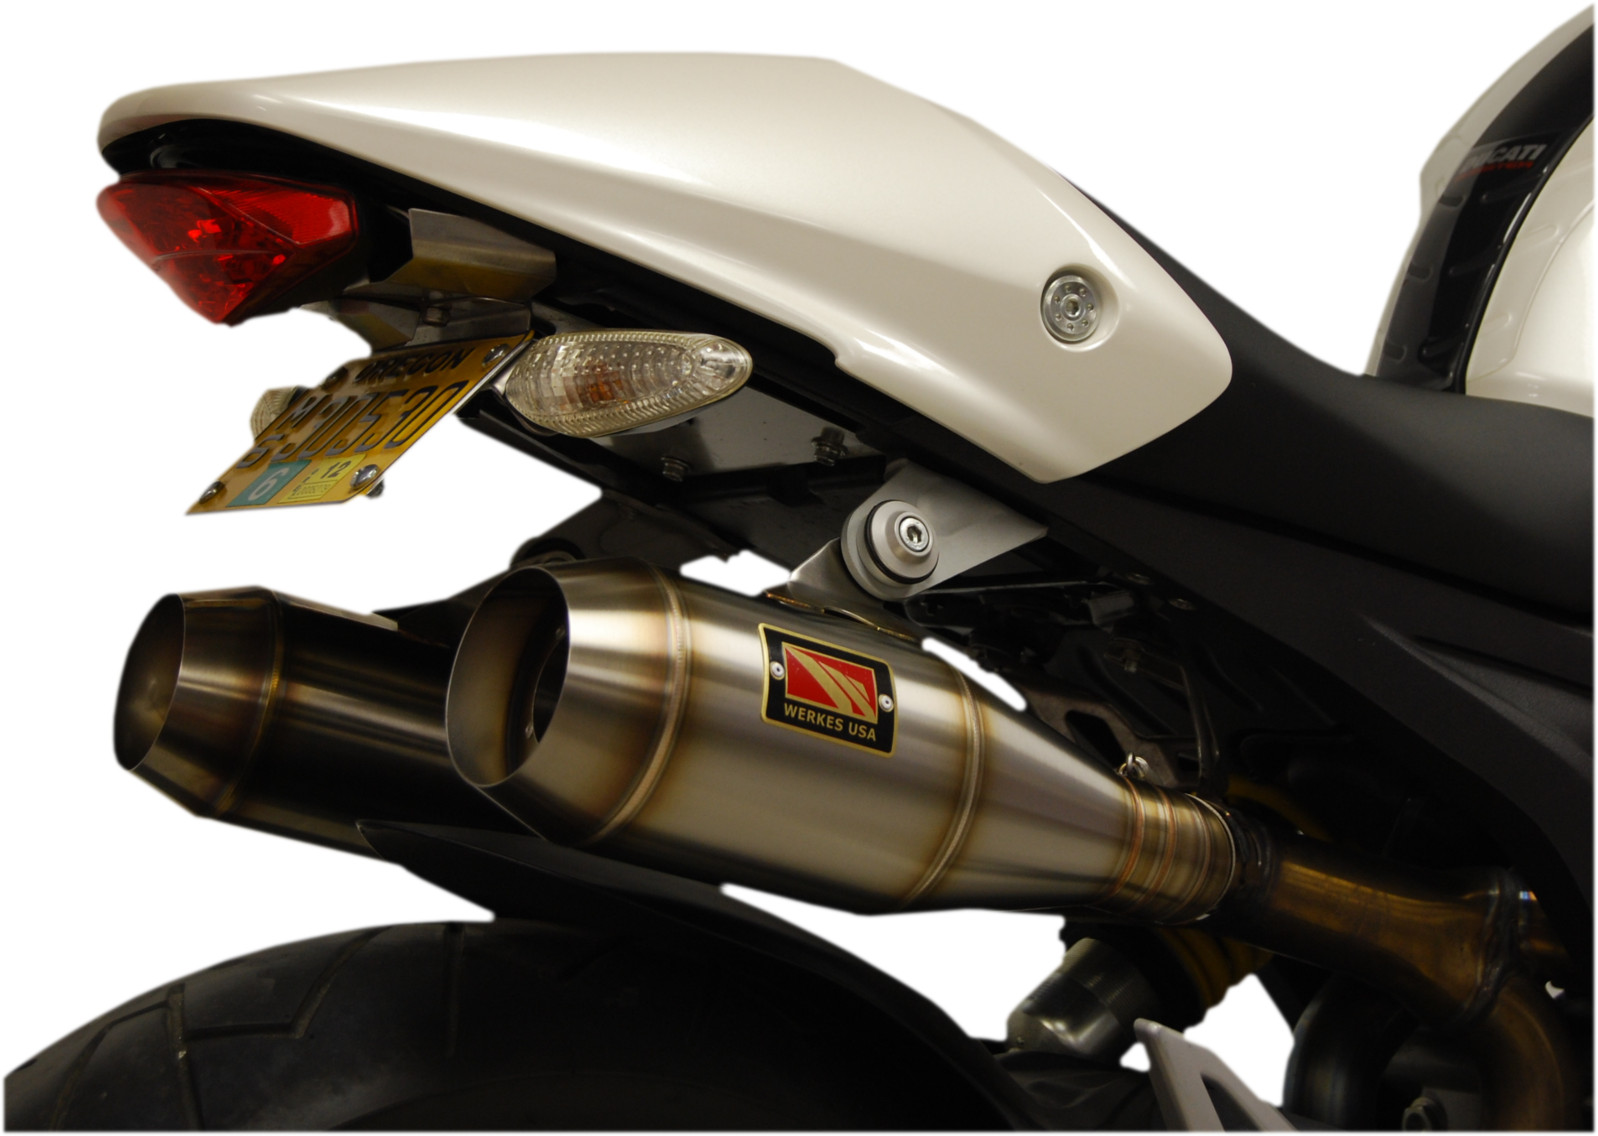 Dual GP Slip On Exhaust - for Ducati Monster 696, 796, 1100 - Click Image to Close